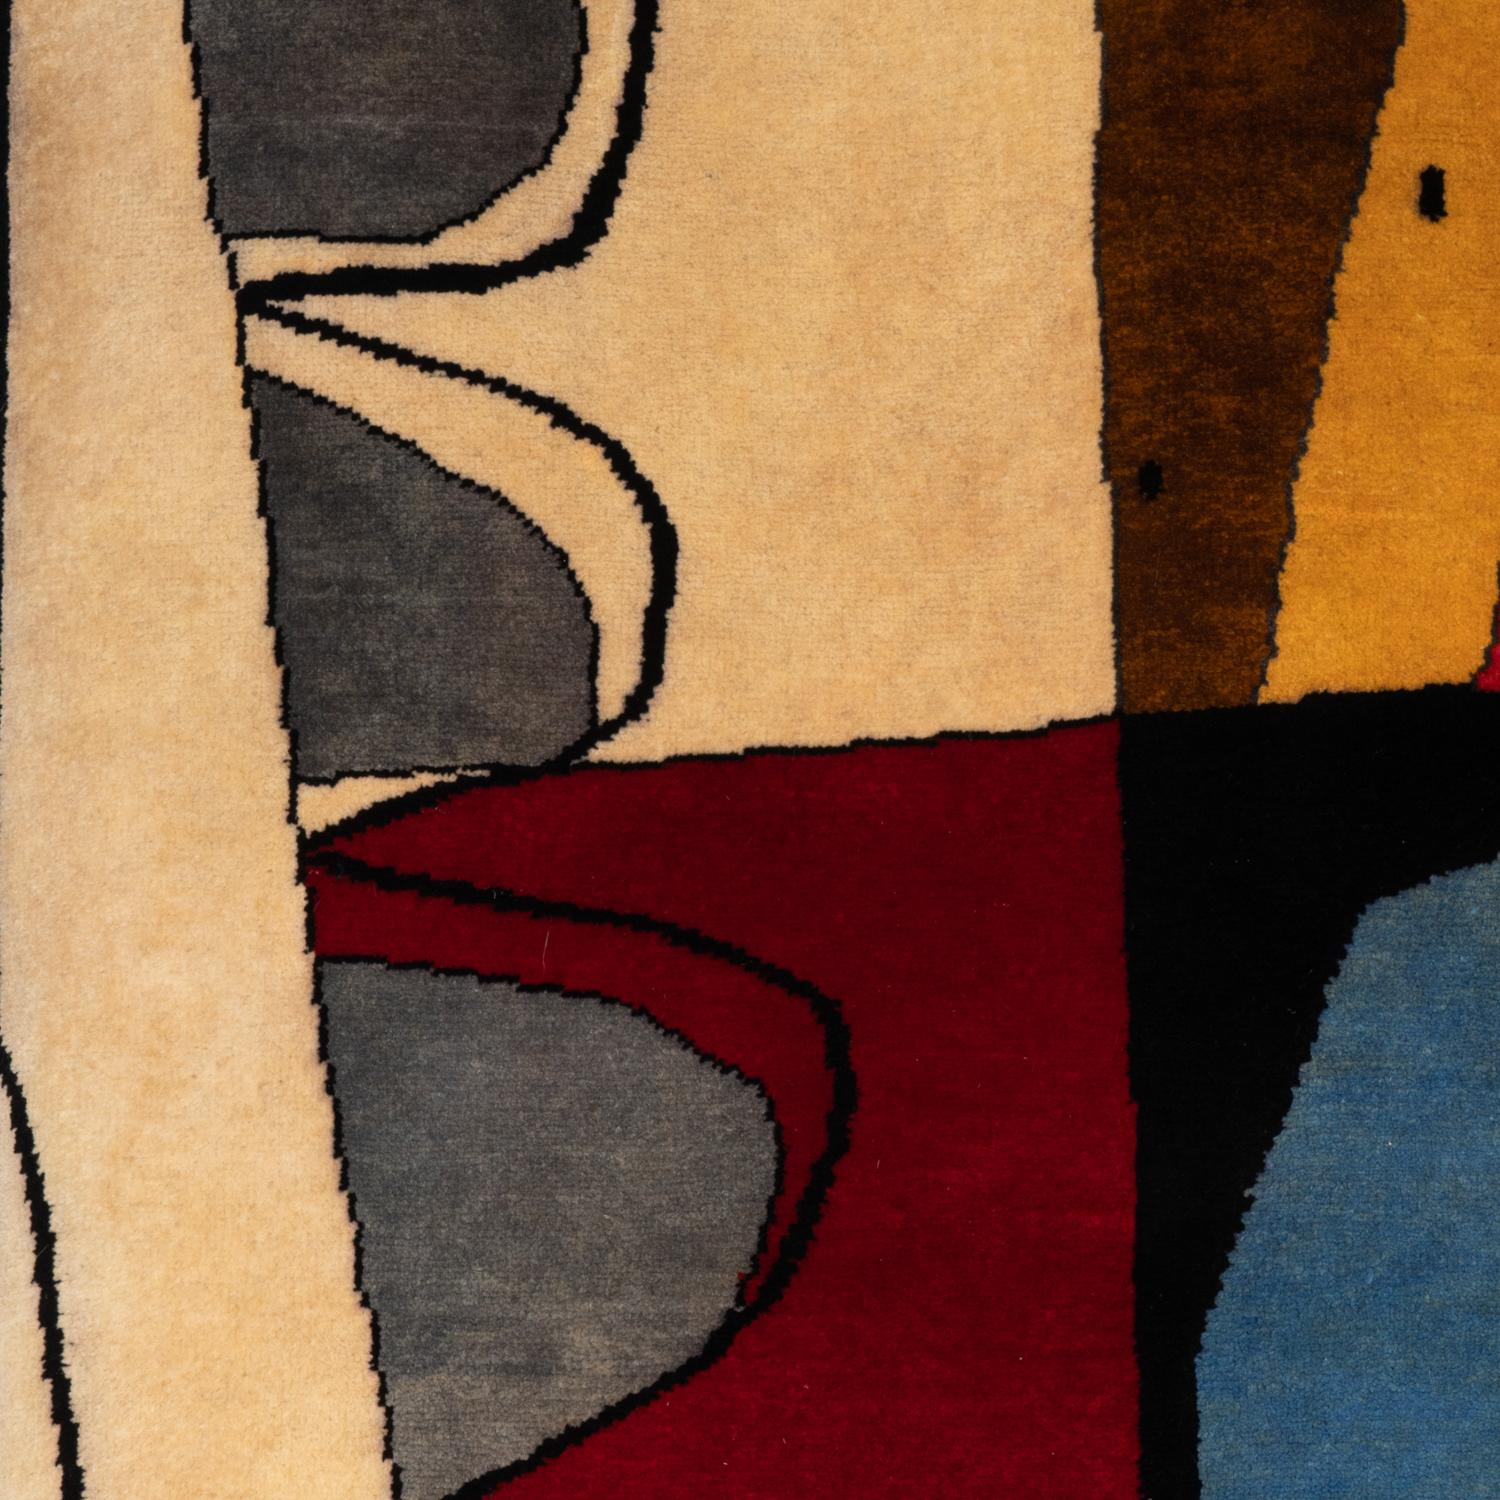 Rug, or tapestry, after a work by Le Corbusier entitled « Taureau XIII » and dated 1956. Hand-knotted and in Merino wool. Can be installed on the floor or displayed on the wall.

Contemporary work of craftsmen.

On demande. Will be numbered 2/8.